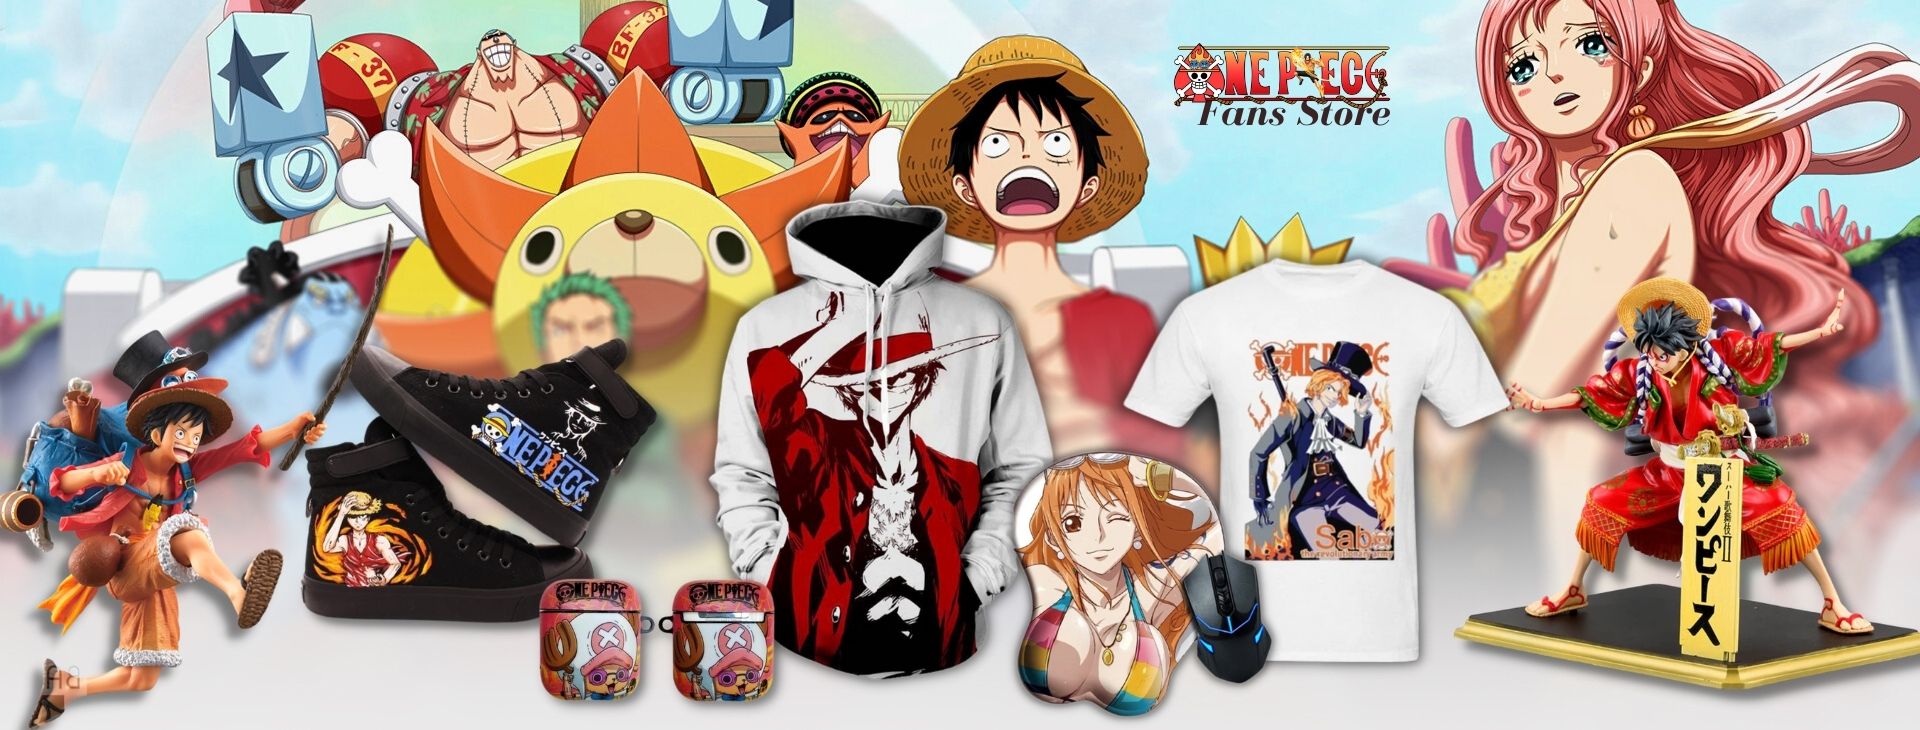 One Piece Merch - OFFICIAL ®One Piece Store